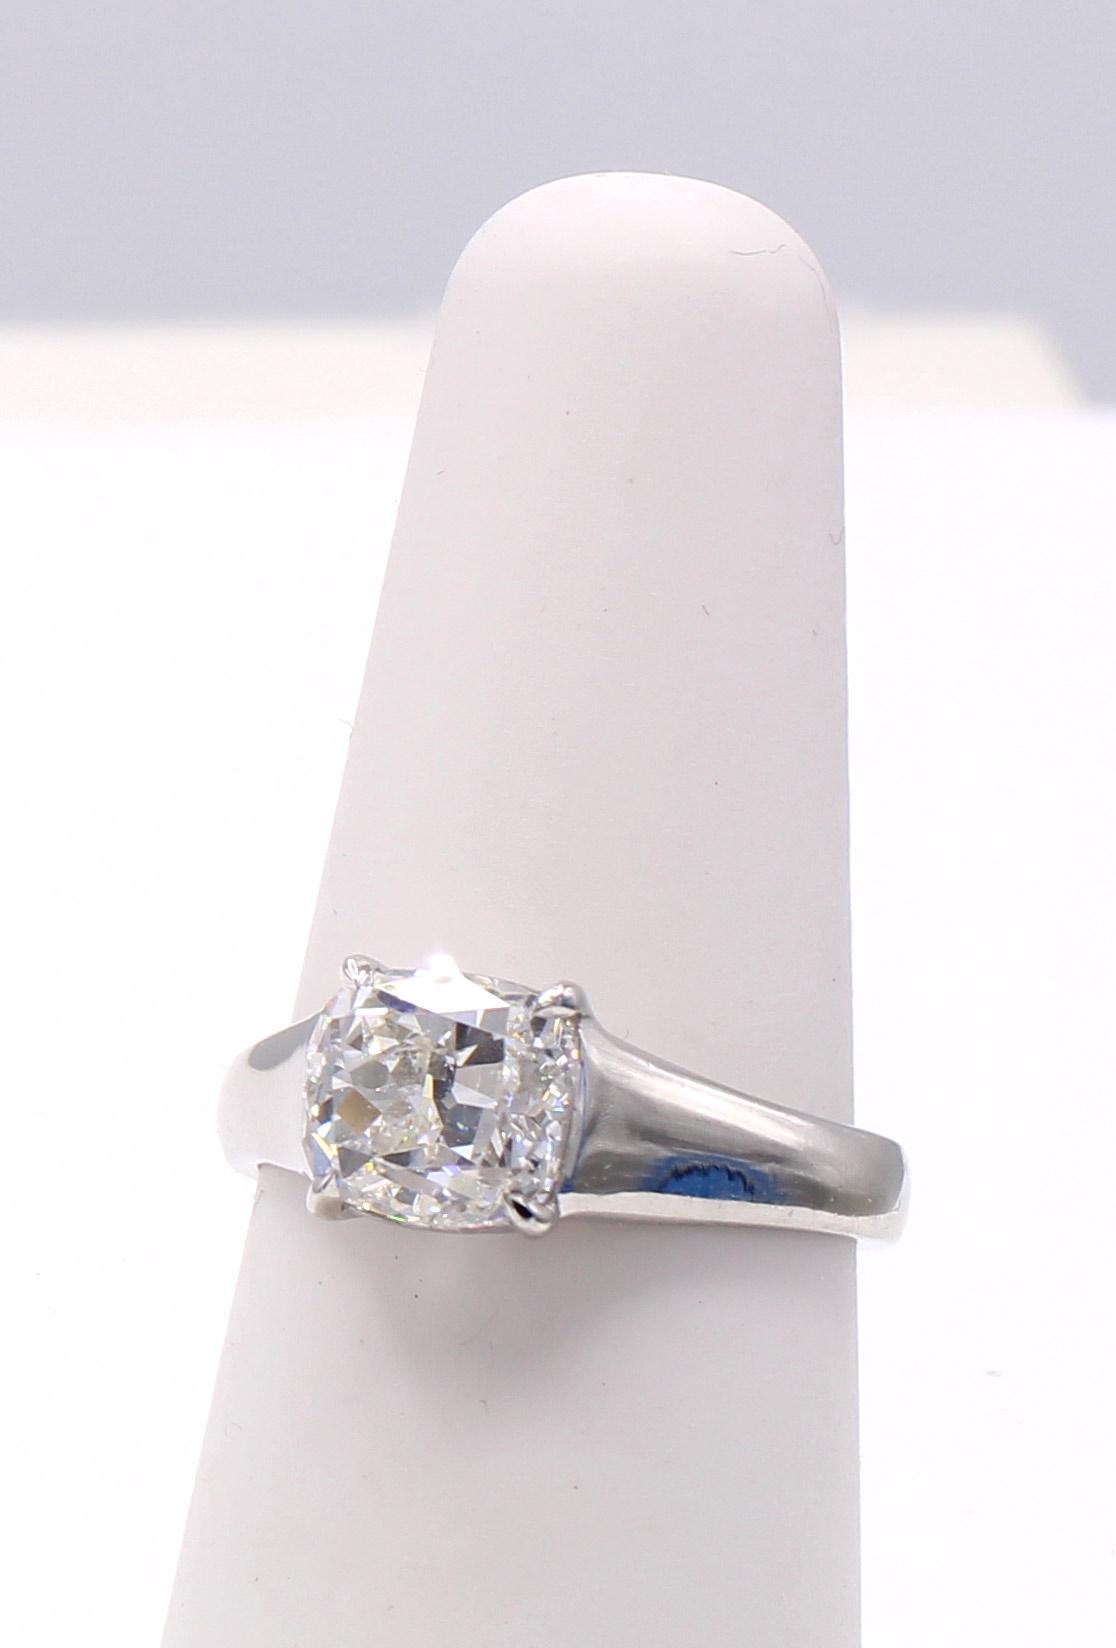 A wonderful well proportioned bright white and brilliant cushion weighing 2.04 carats is the centerpiece of this platinum engagement ring. The cushion comes with a report from the GIA giving it a color grade of H and a clarity grade of VS2.